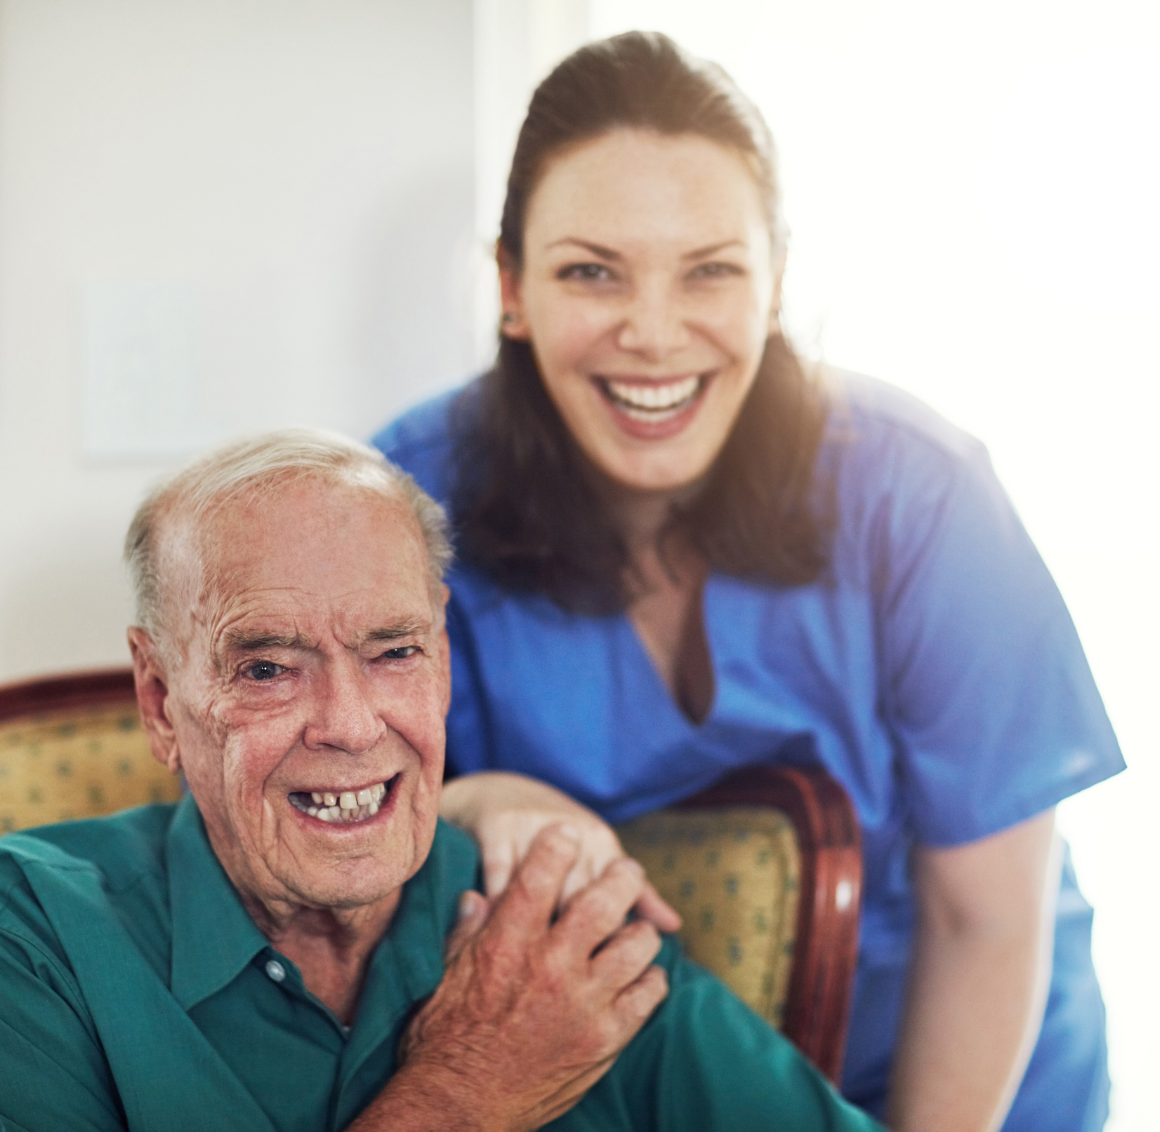 A caregiver and client smile, representing the quality of our 24 Hour Live-In Care in Lexington, VA